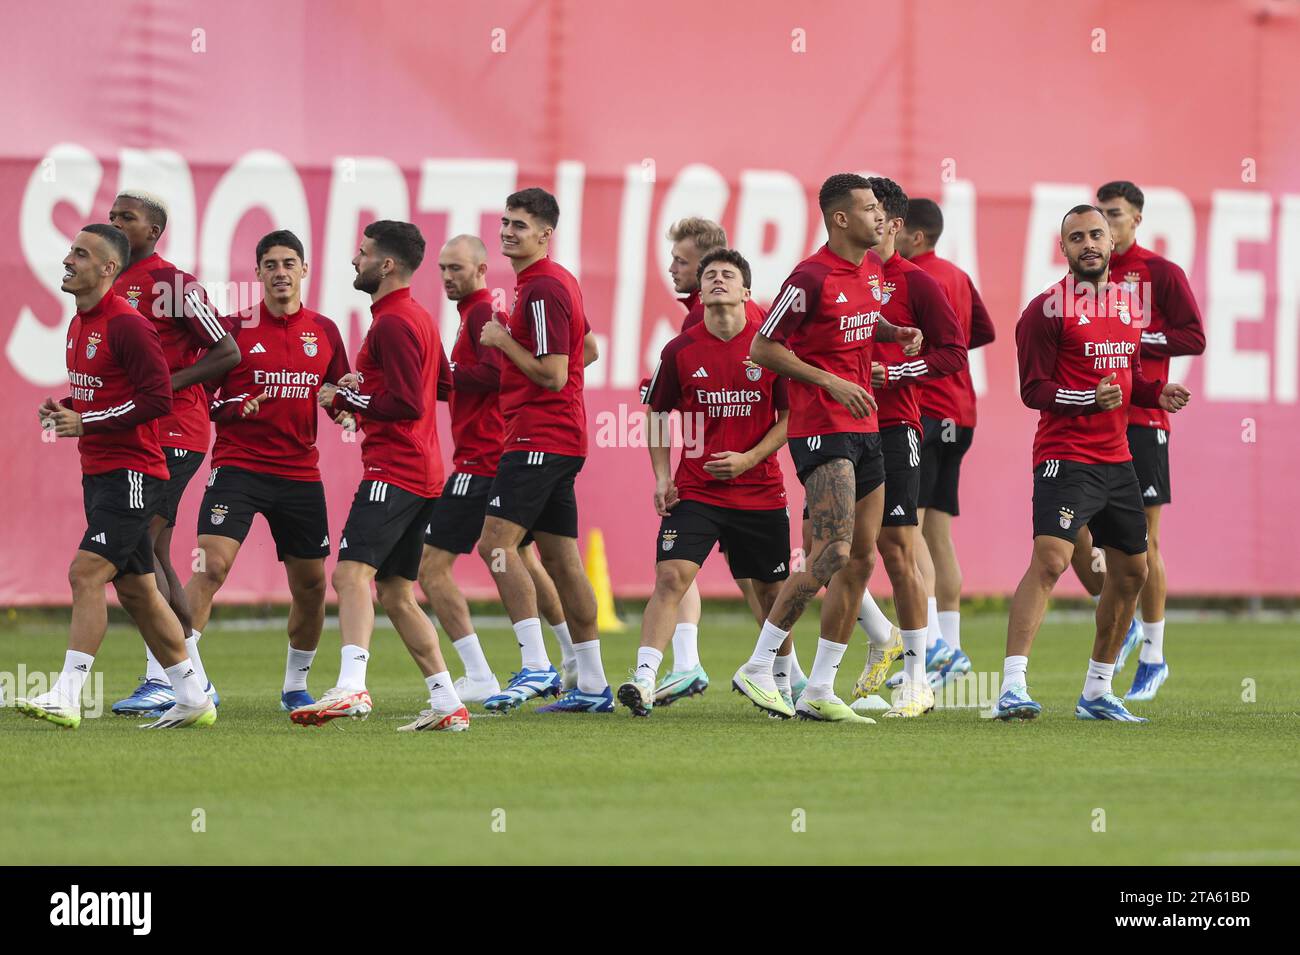 Seixal, 11/28/2023 - Sport Lisboa e Benfica trained this afternoon at the club'spus in SeixSeixal, continuing preparation for tomorrow's game agt Ist Inter, counting for the group stage of the Champions League 2023/24. Chiquinho; Rafa; Antonio Silva; João Neves (Pedro Rocha / Global Imagens) Stock Photo